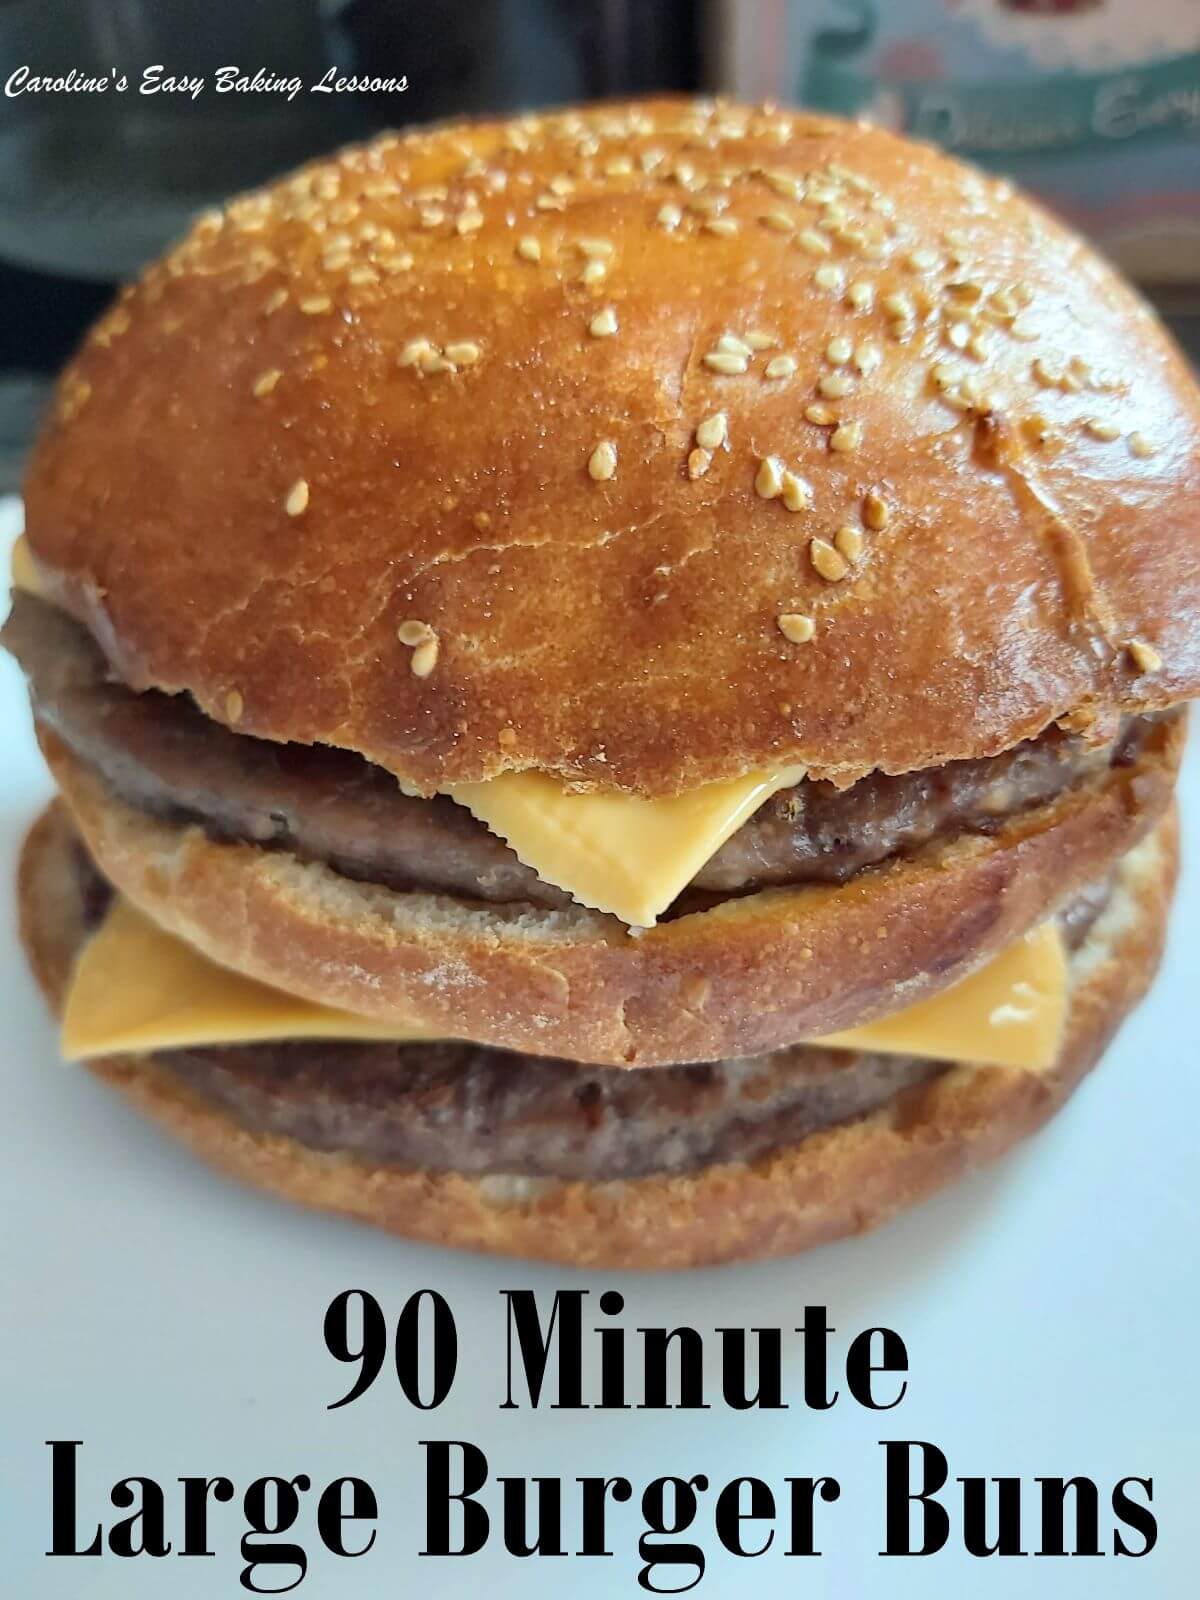 90 minute large burger buns with 2 burgers and cheese slices.